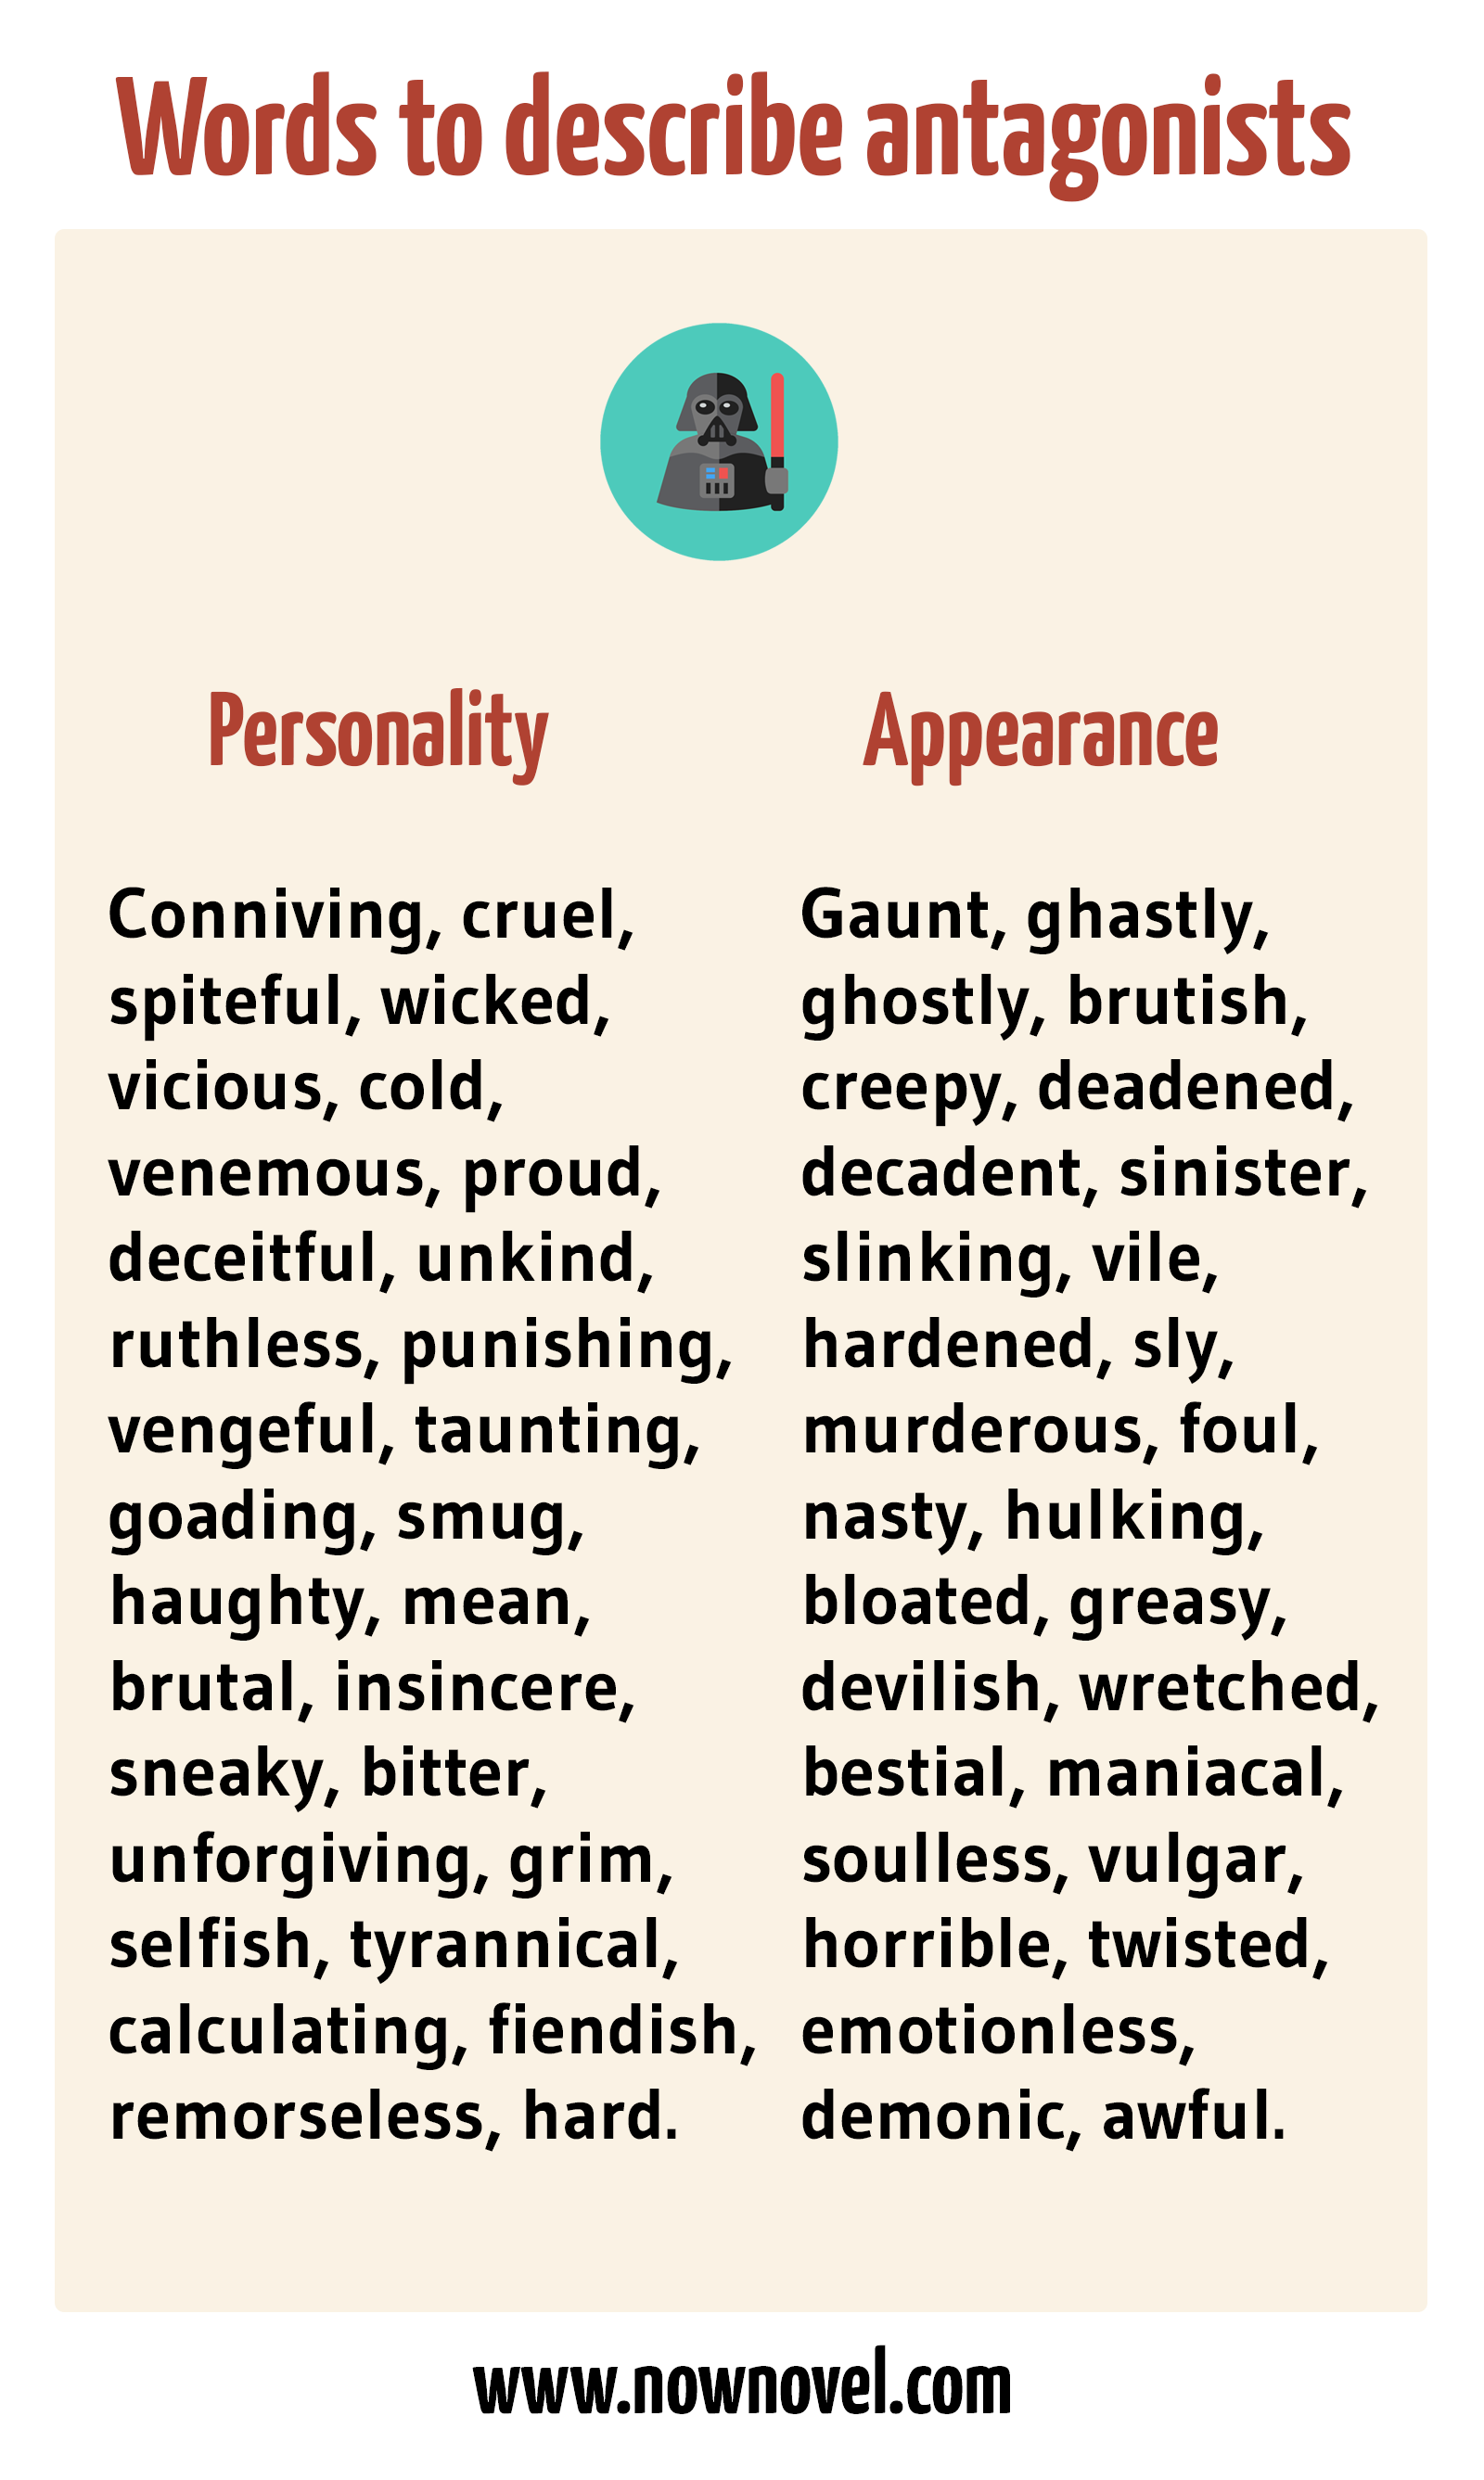 Infographic - antagonist examples - words to describe antagonists | Now Novel